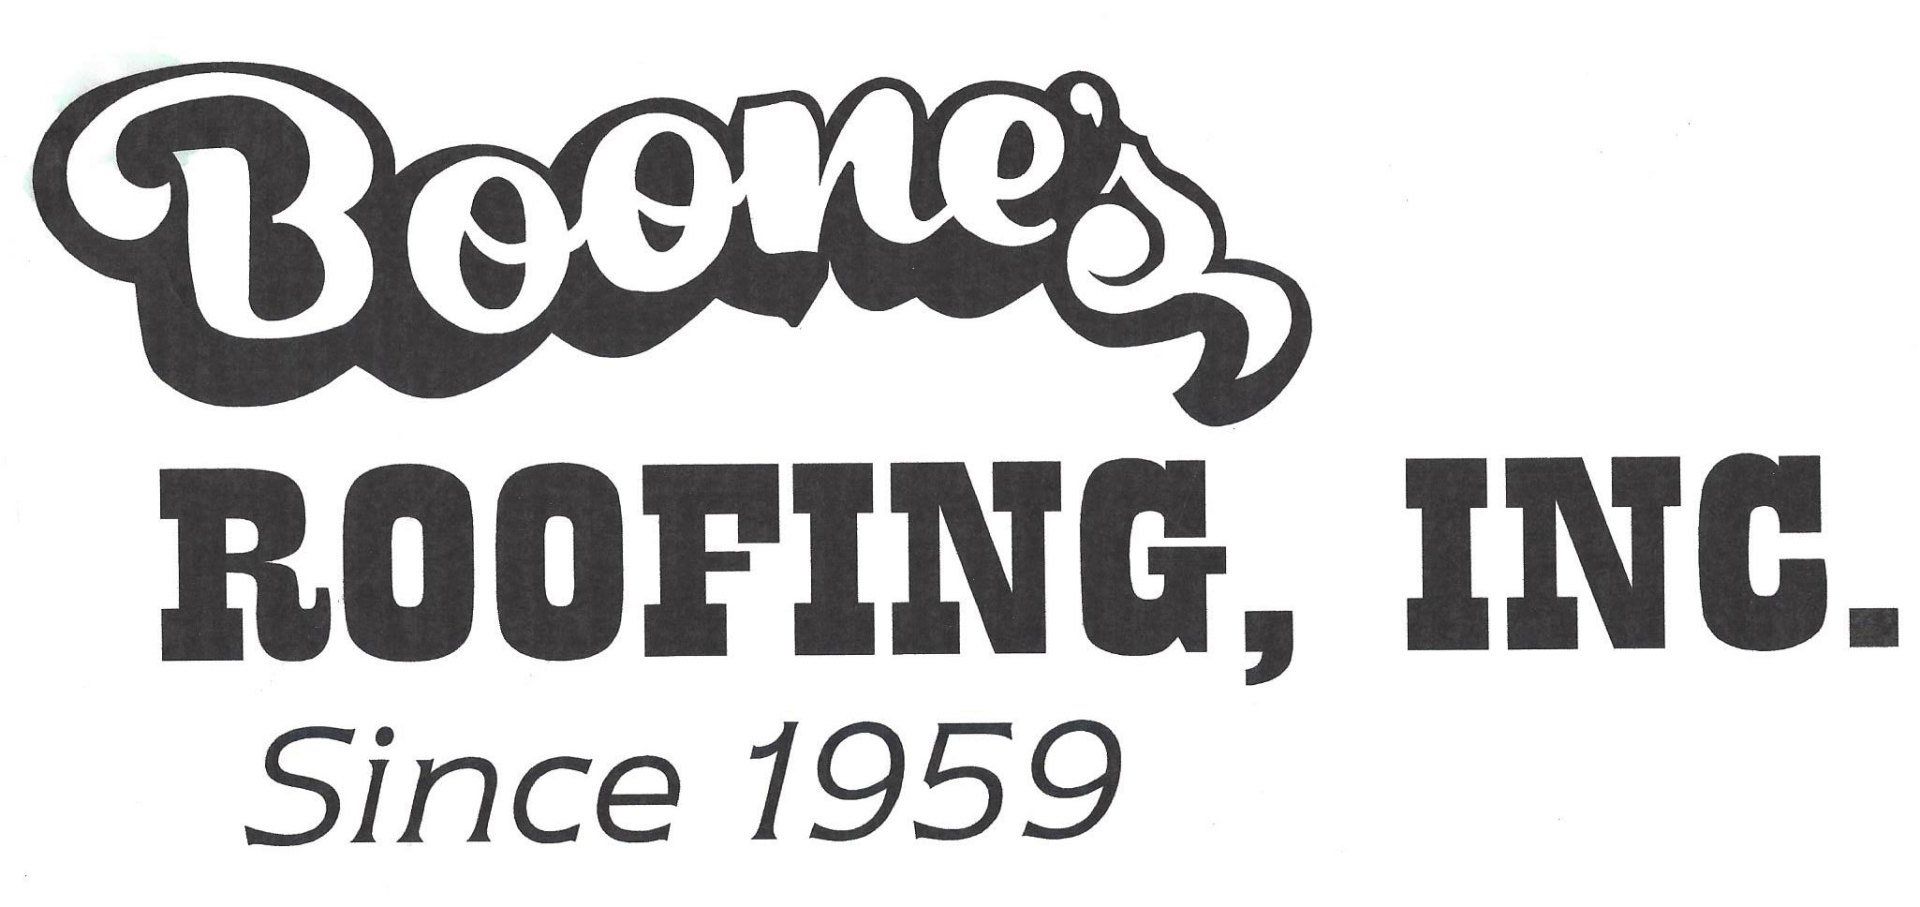 Boone's Roofing Inc